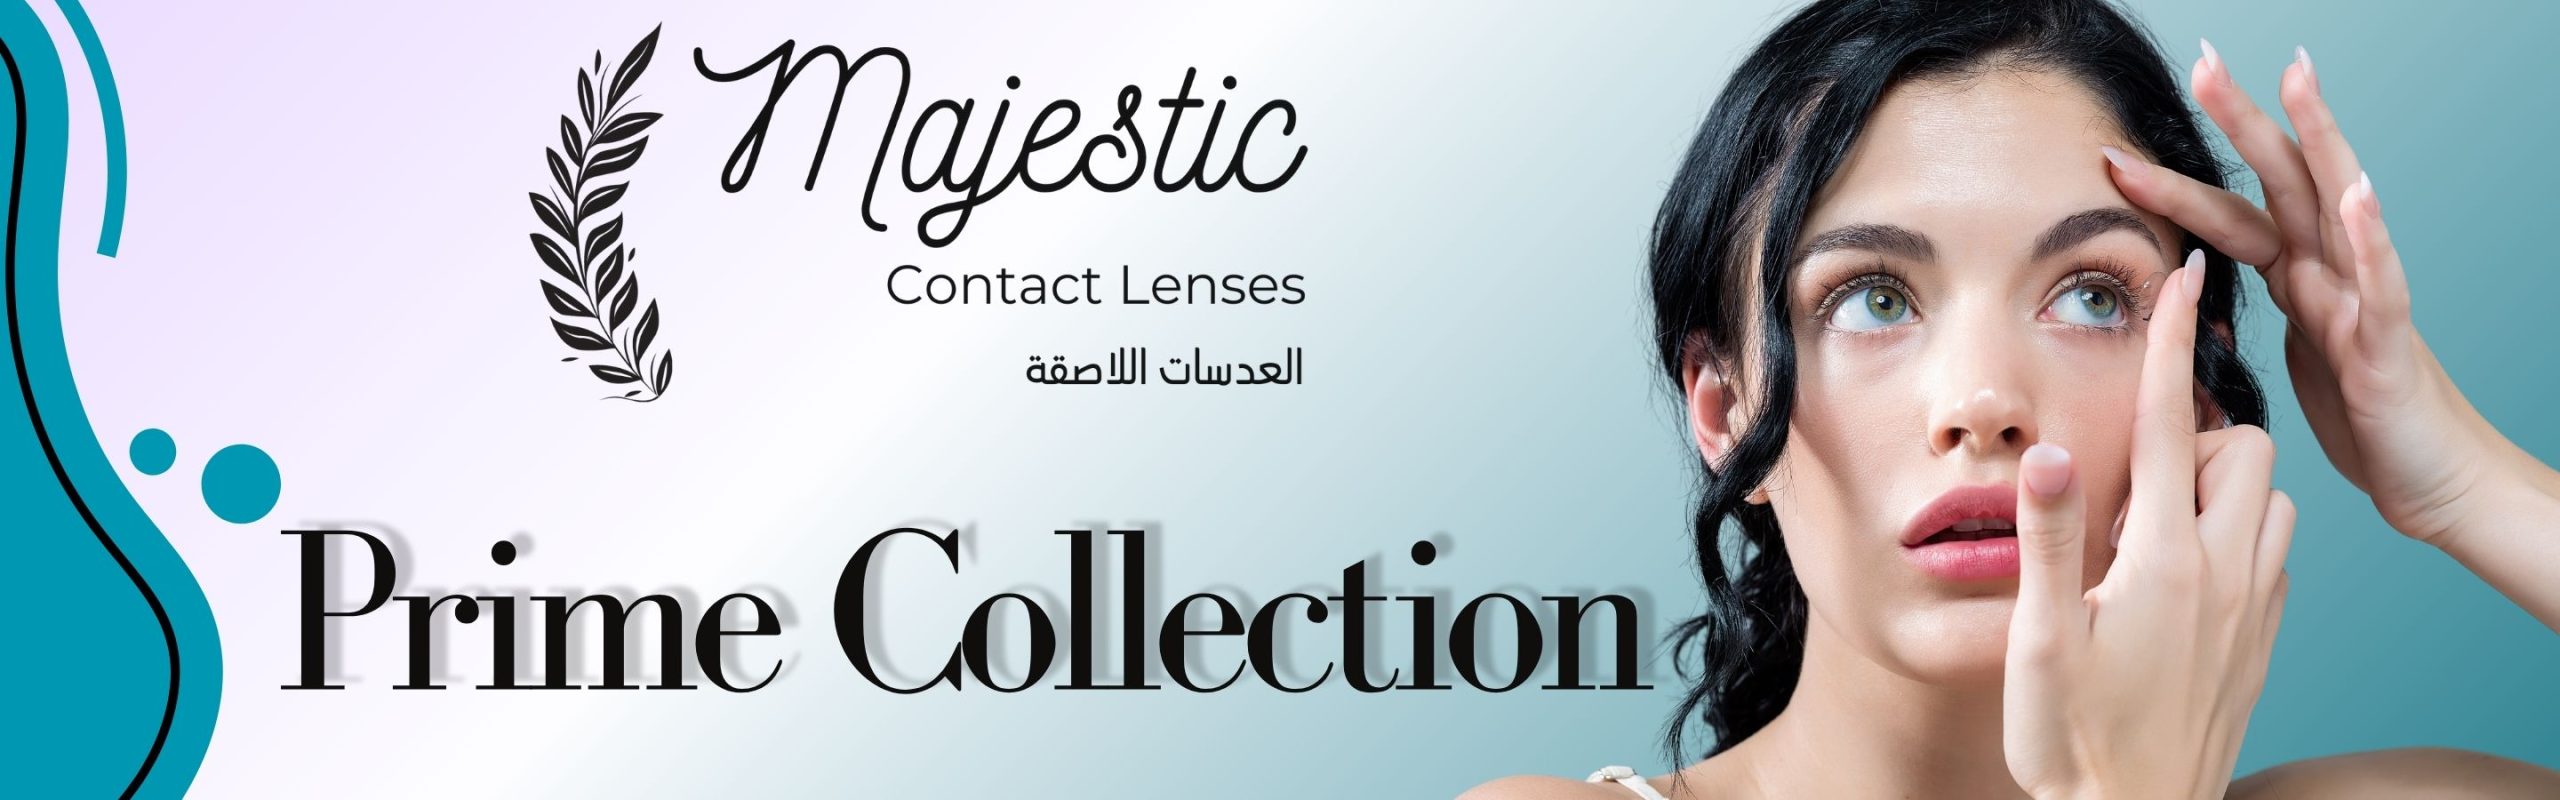 Prime Collection By Majestic Lenses